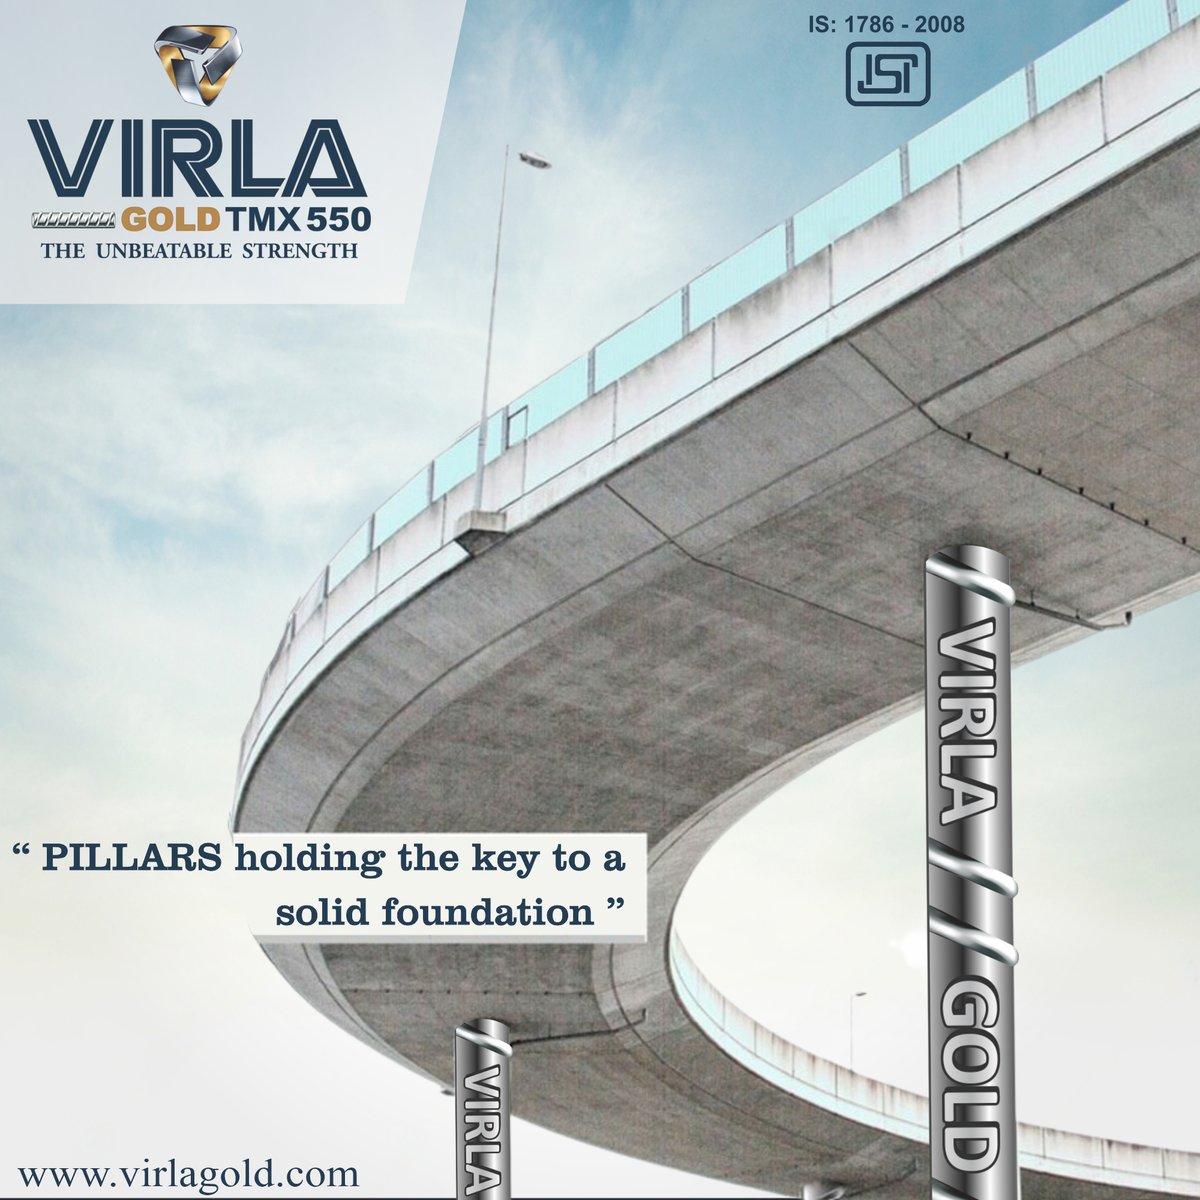 'Building a strong foundation starts with the right materials. Our VIRLA GOLD TMX 550 is the pillar that holds the key to your construction's solidity.

 #virlagoldtmx550 #SolidFoundation #ConstructionMaterials #ConstructionGoals #BuiltToLast #BuildingDreams #ConstructionLife